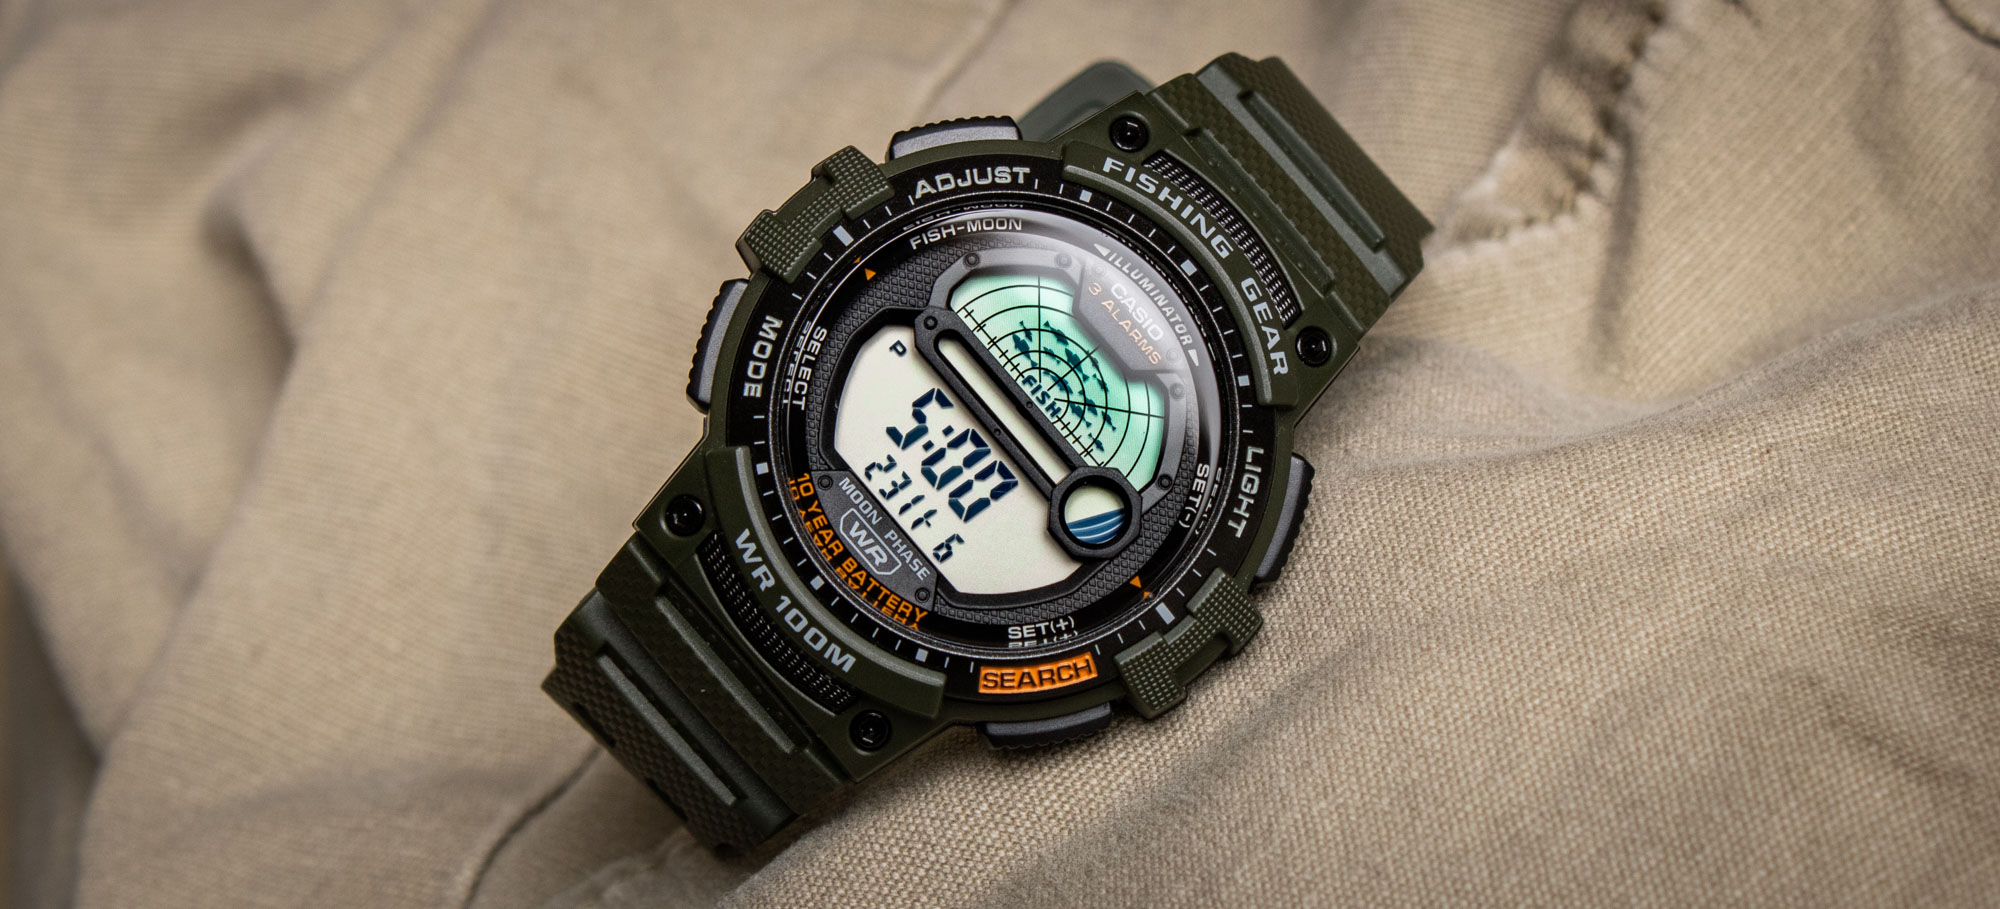 Go Fishing With The Casio WS1500H-1 Fish & Moon Phase Watch